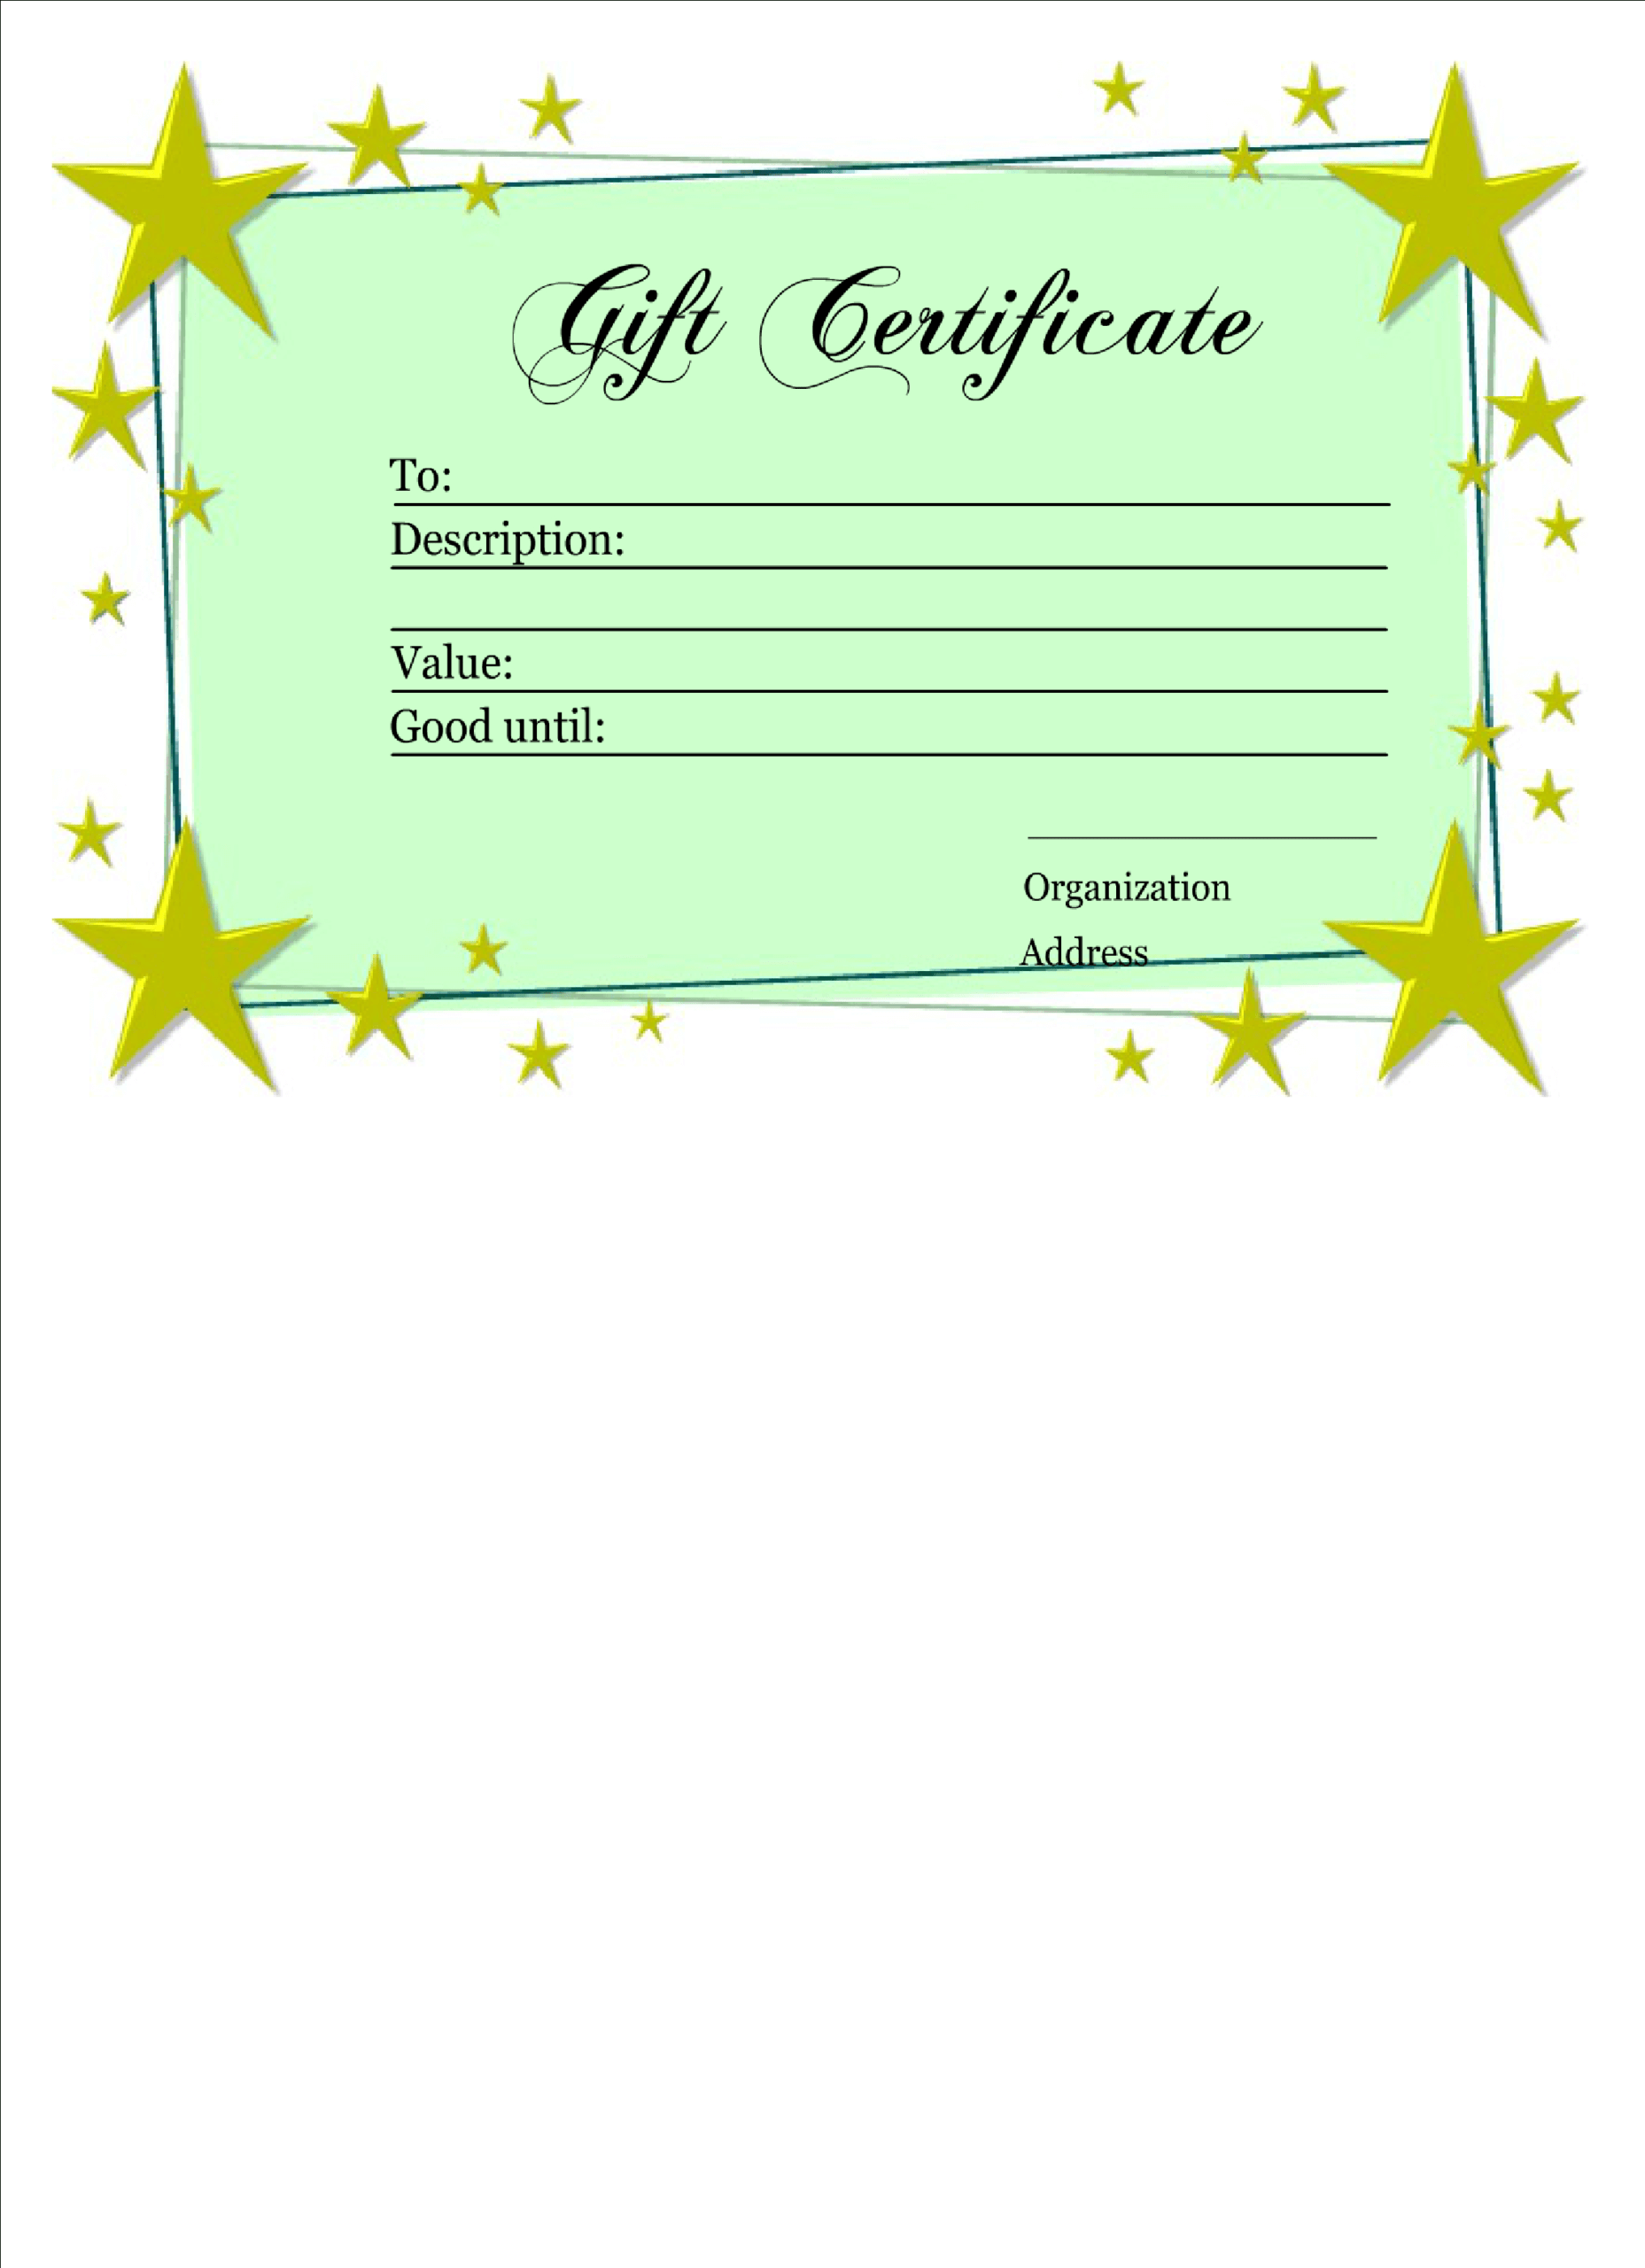 Download Hd Homemade Gift Certificate Template Main Image With Regard To Homemade Gift Certificate Template